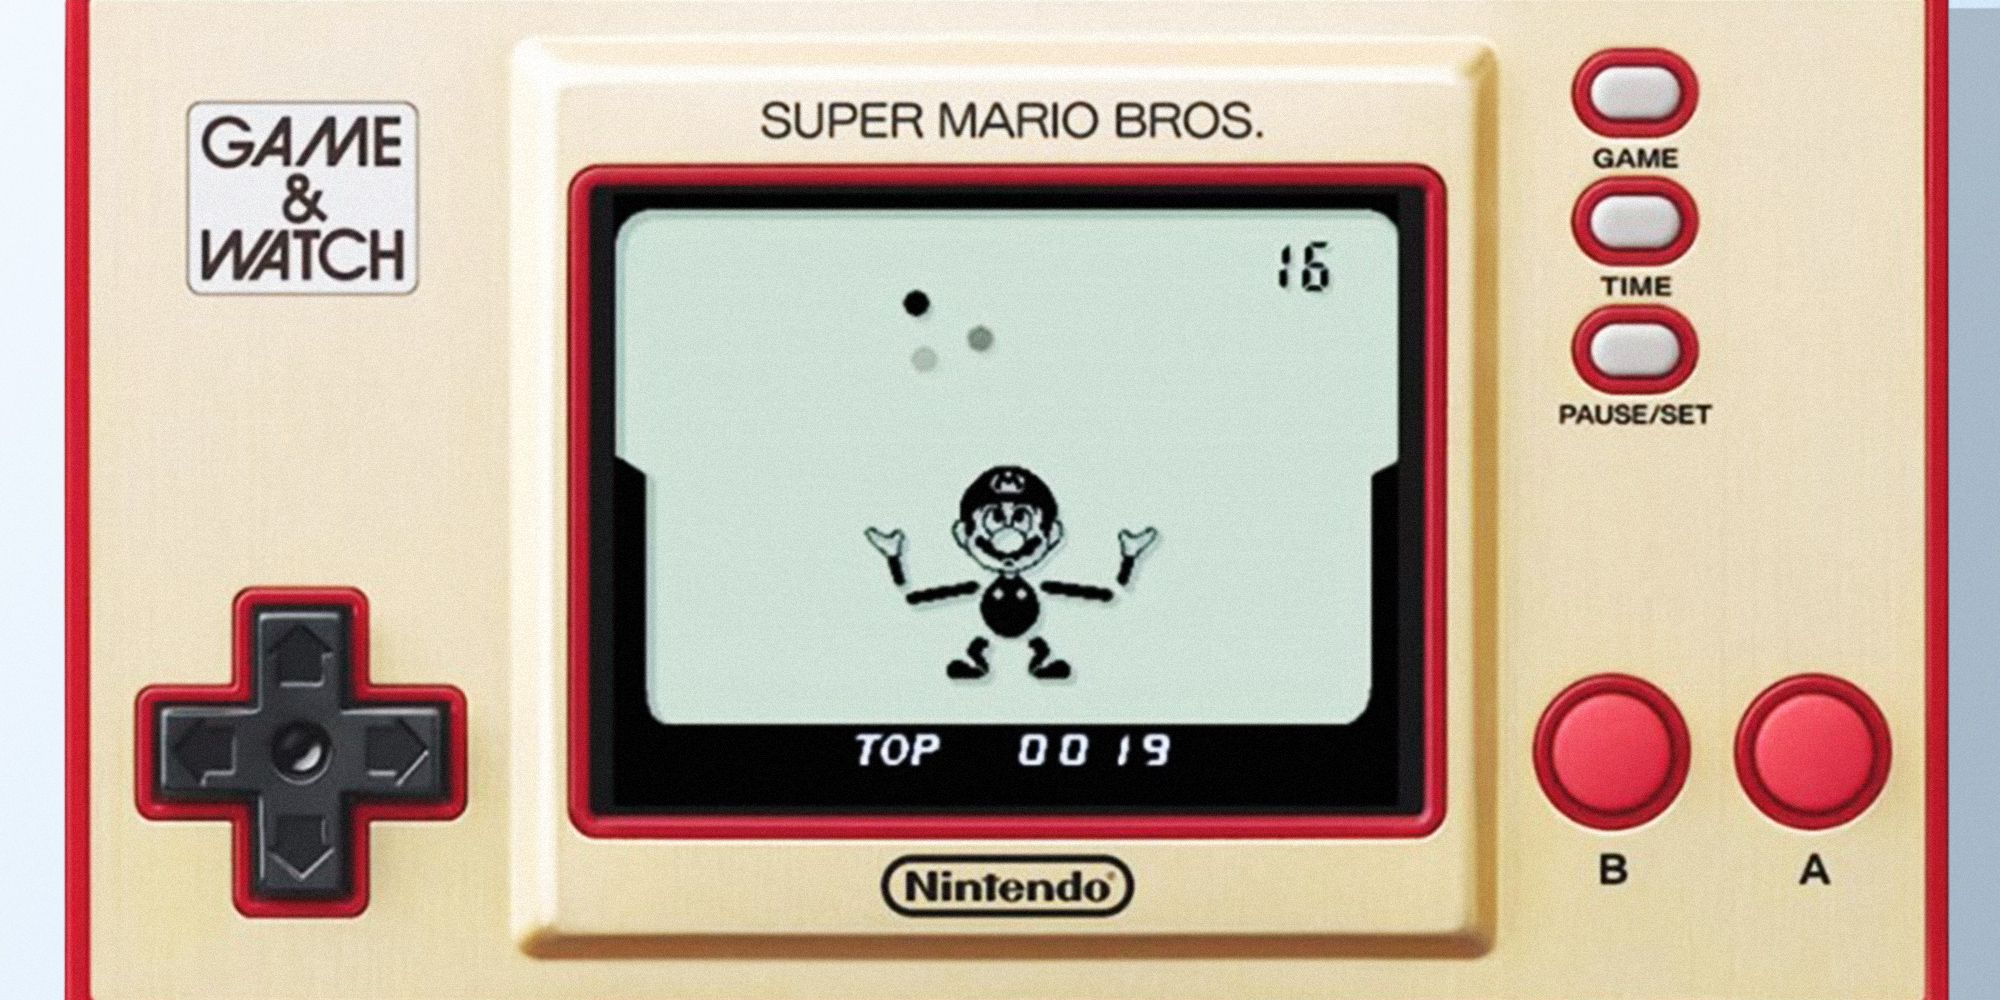 Forfatter Numerisk Recept All Nintendo Game and Watch Consoles, From Ball to Super Mario Bros  Anniversary